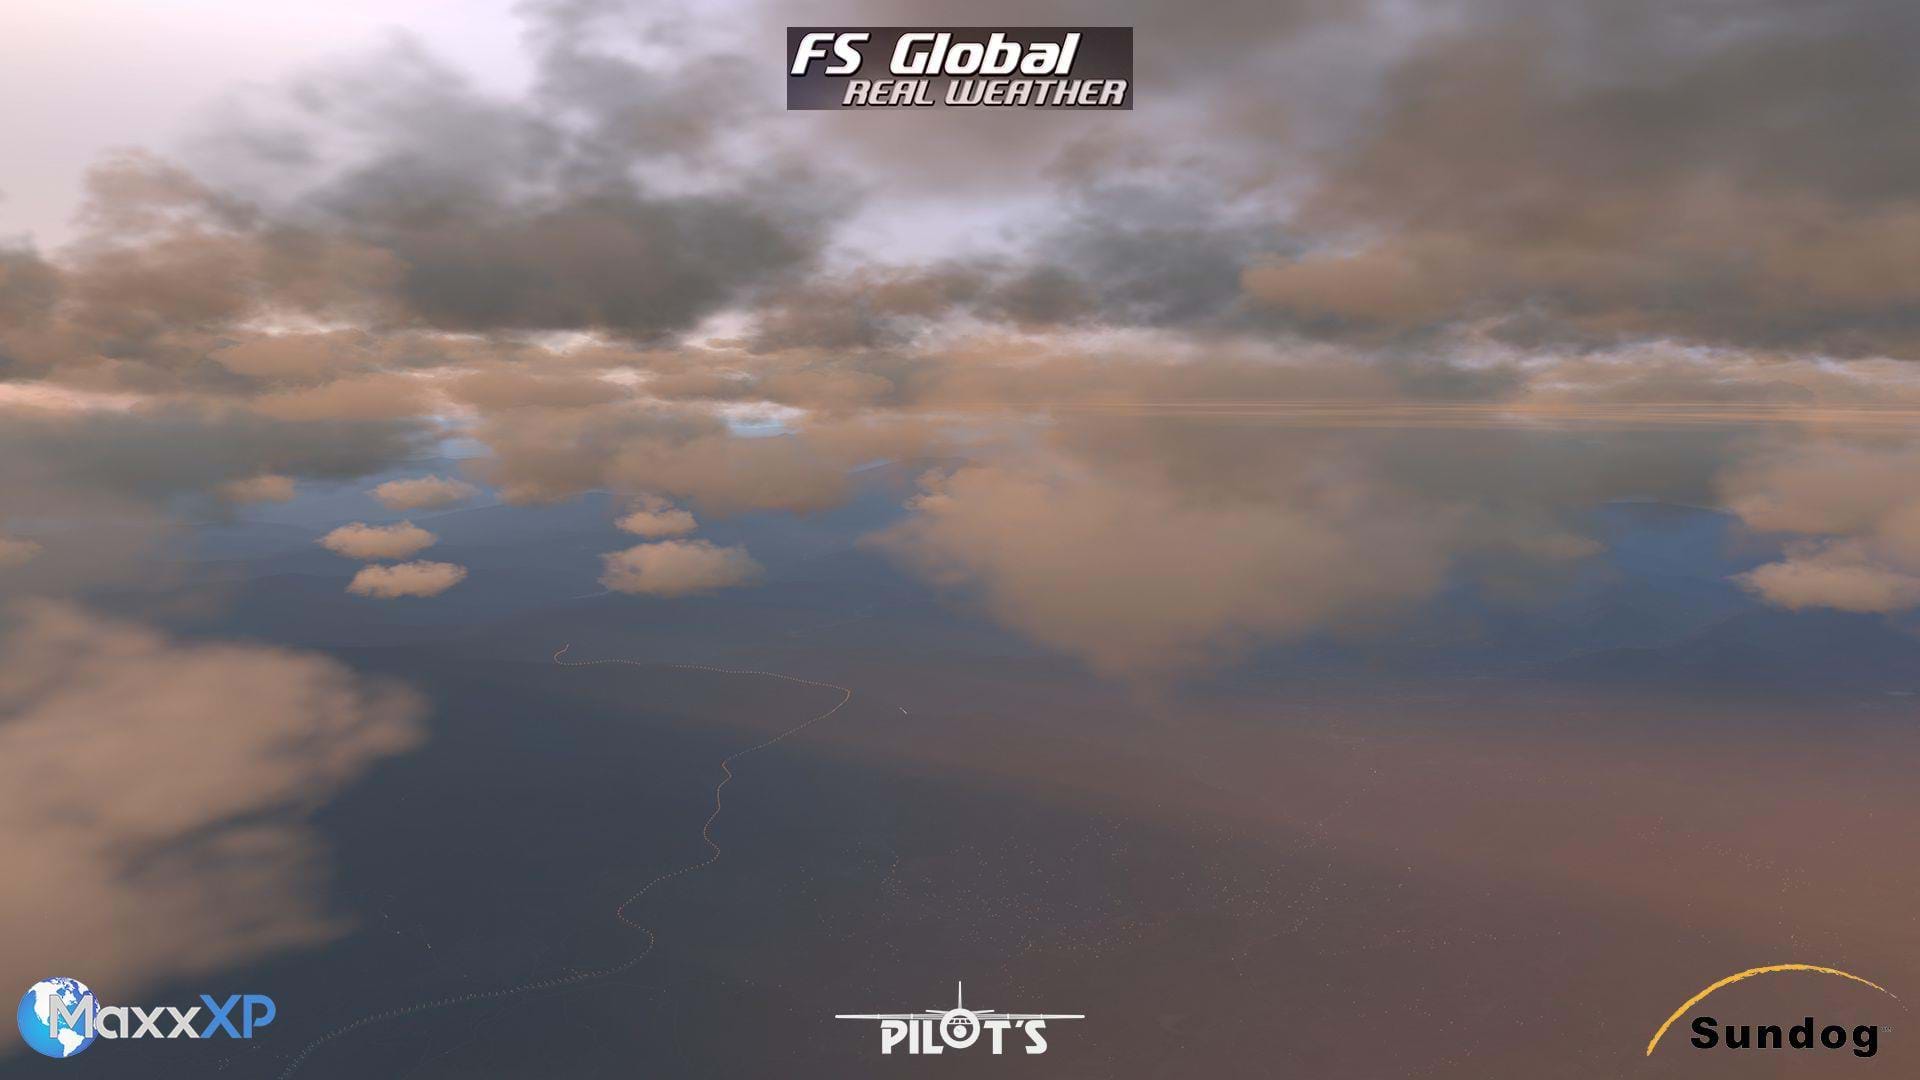 FS Global Real Weather to support SkyMaxx Pro